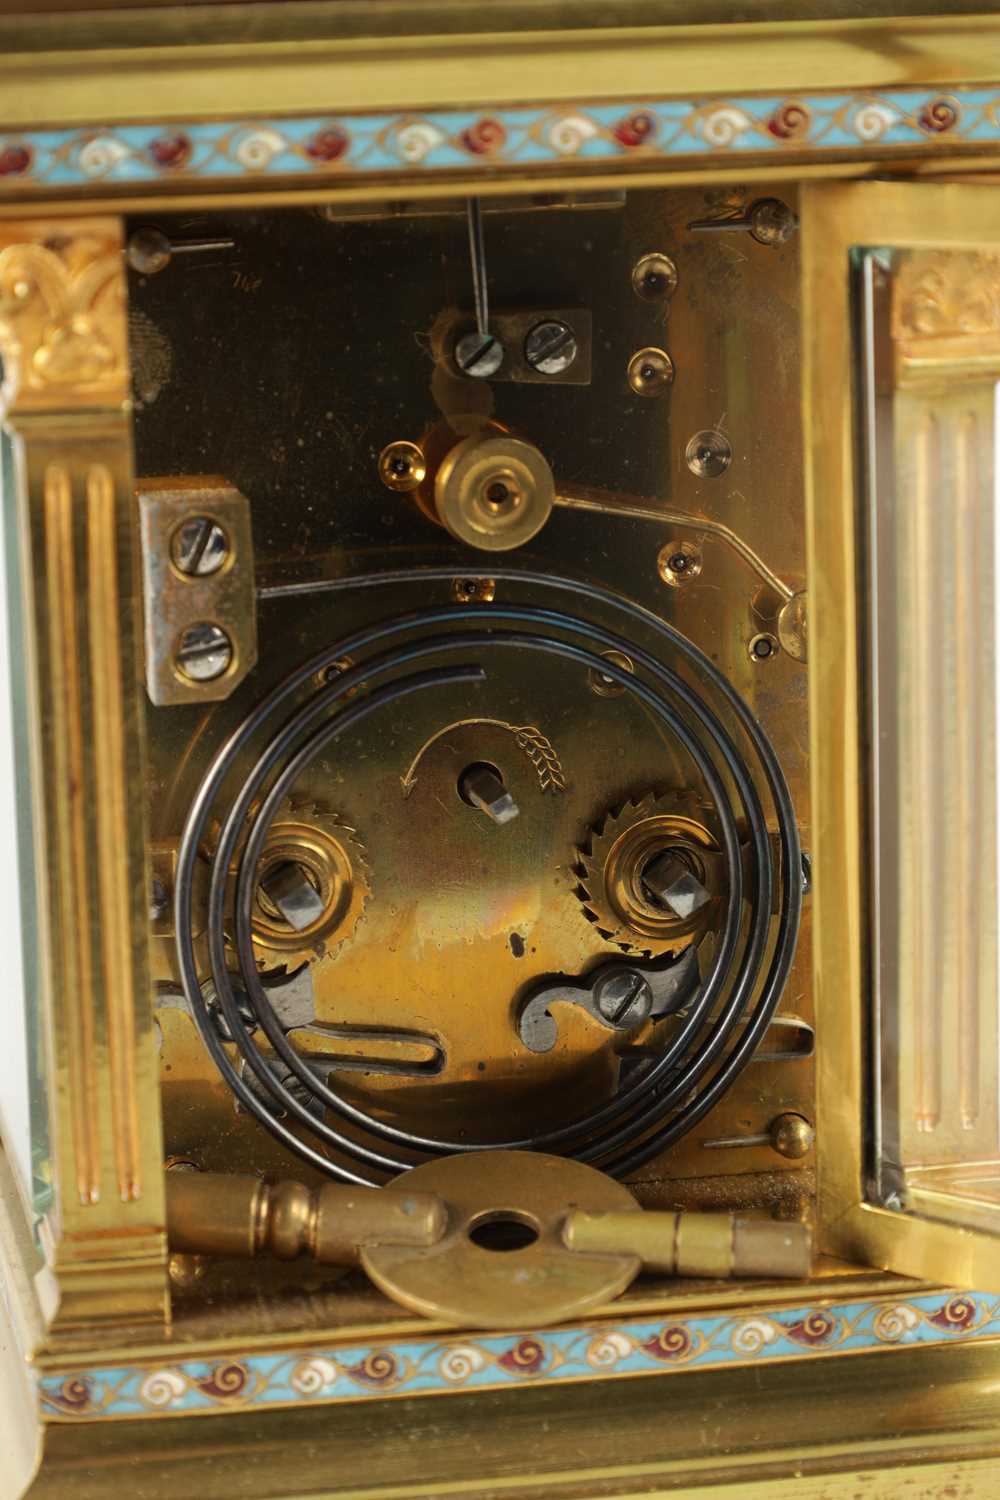 A LATE 19TH CENTURY FRENCH CHAMPLEVE ENAMEL STRIKING CARRIAGE CLOCK - Image 7 of 8